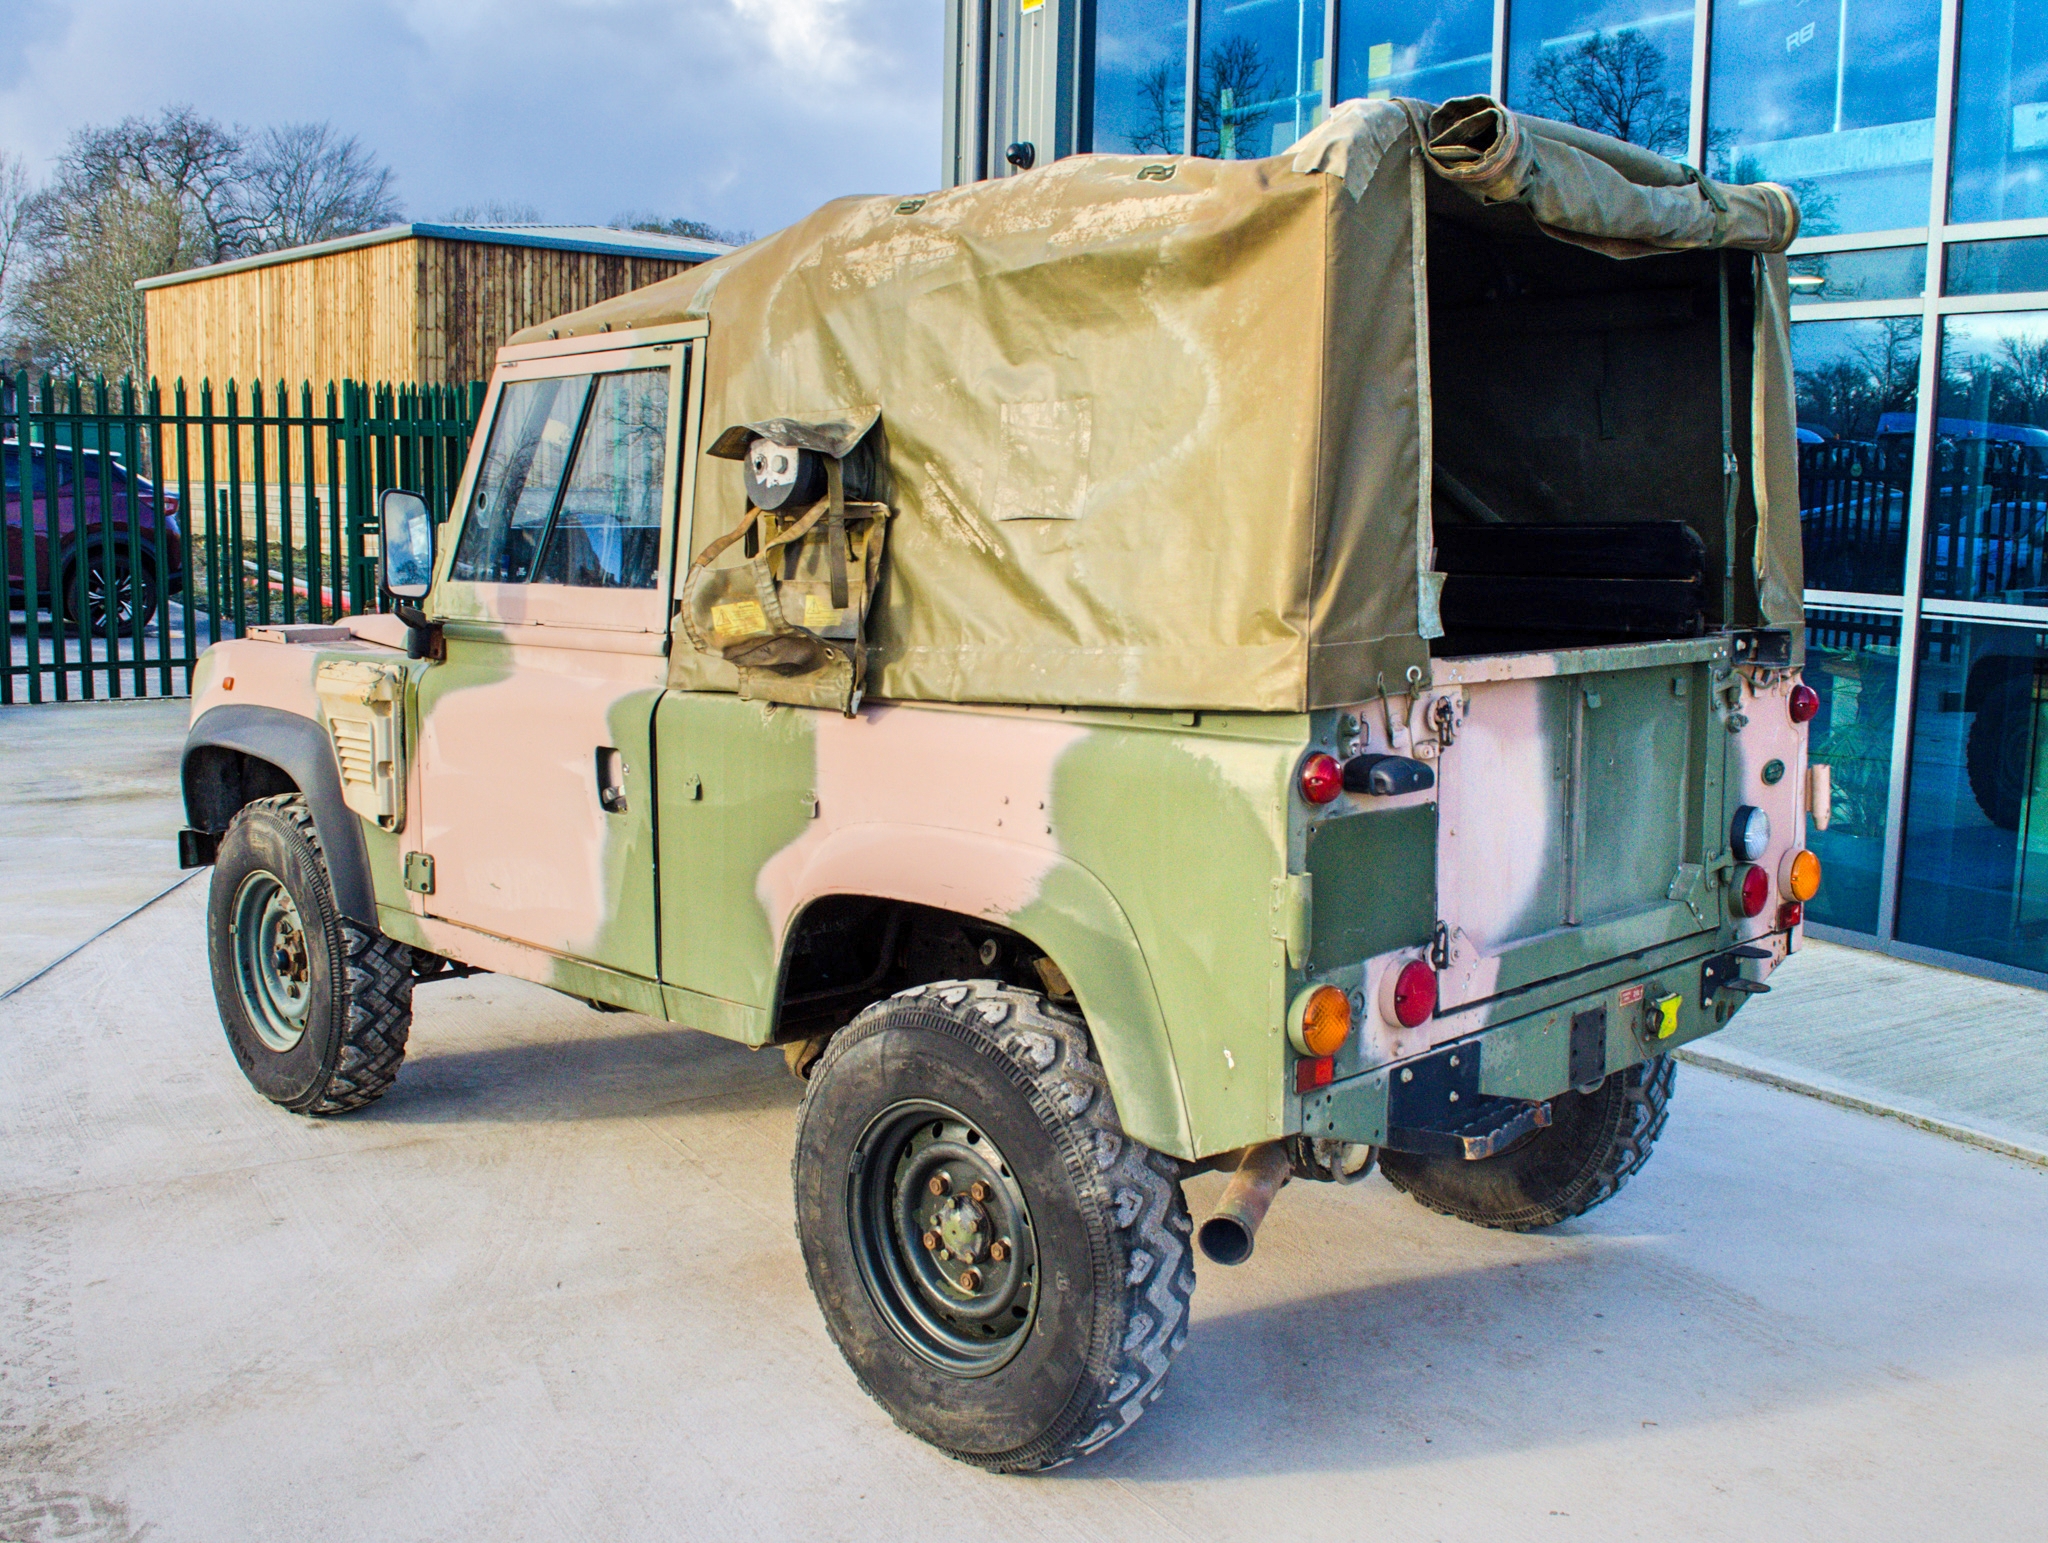 1998 Land Rover Defender 90 WOLF 2,5 litre 300TDI 4 wheel drive utility vehicle Ex MOD - Image 6 of 44